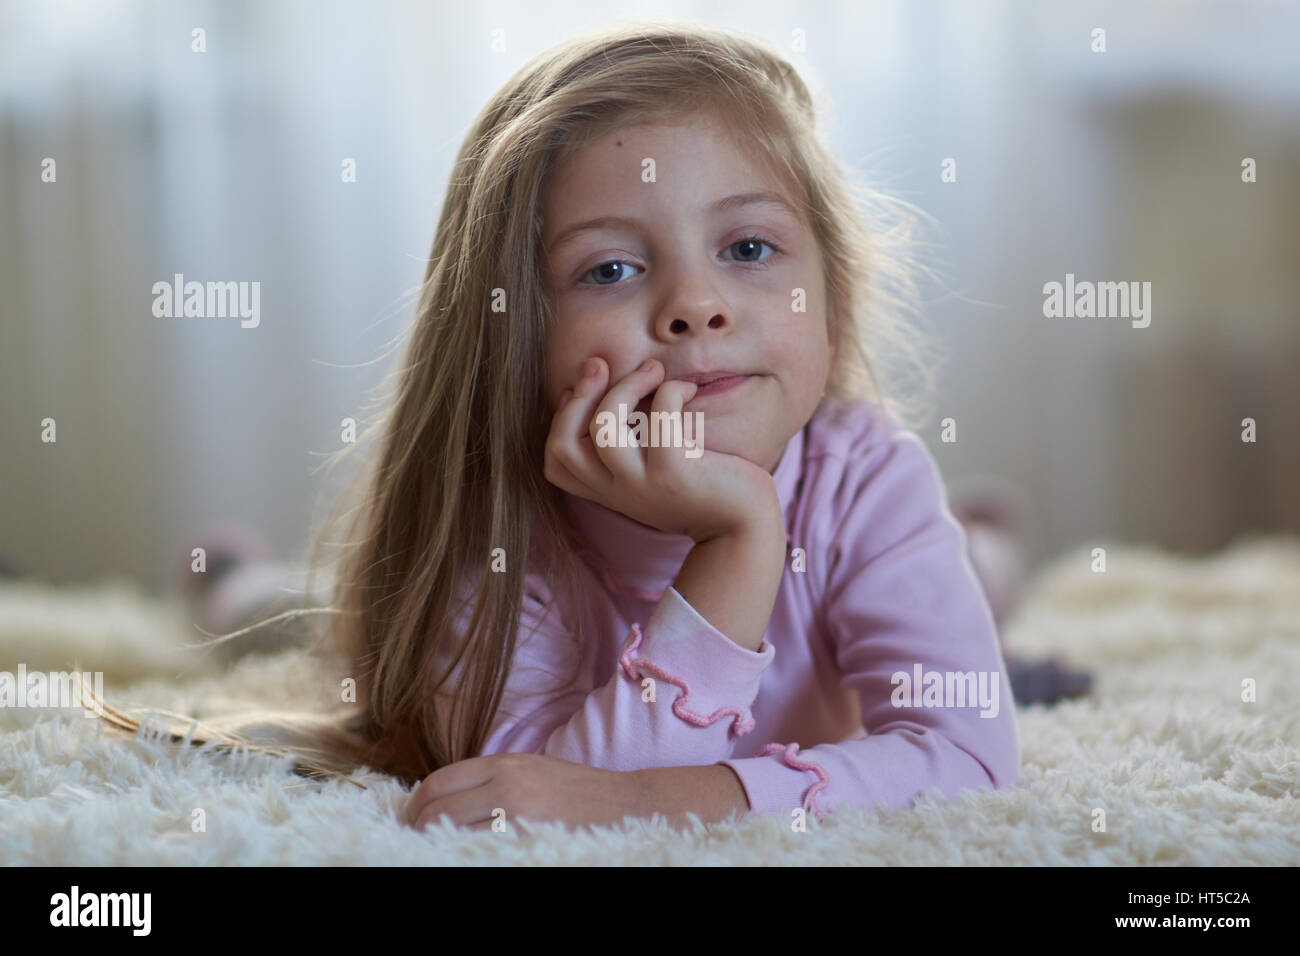 Sweet little girl with long hair on the bed Stock Photo